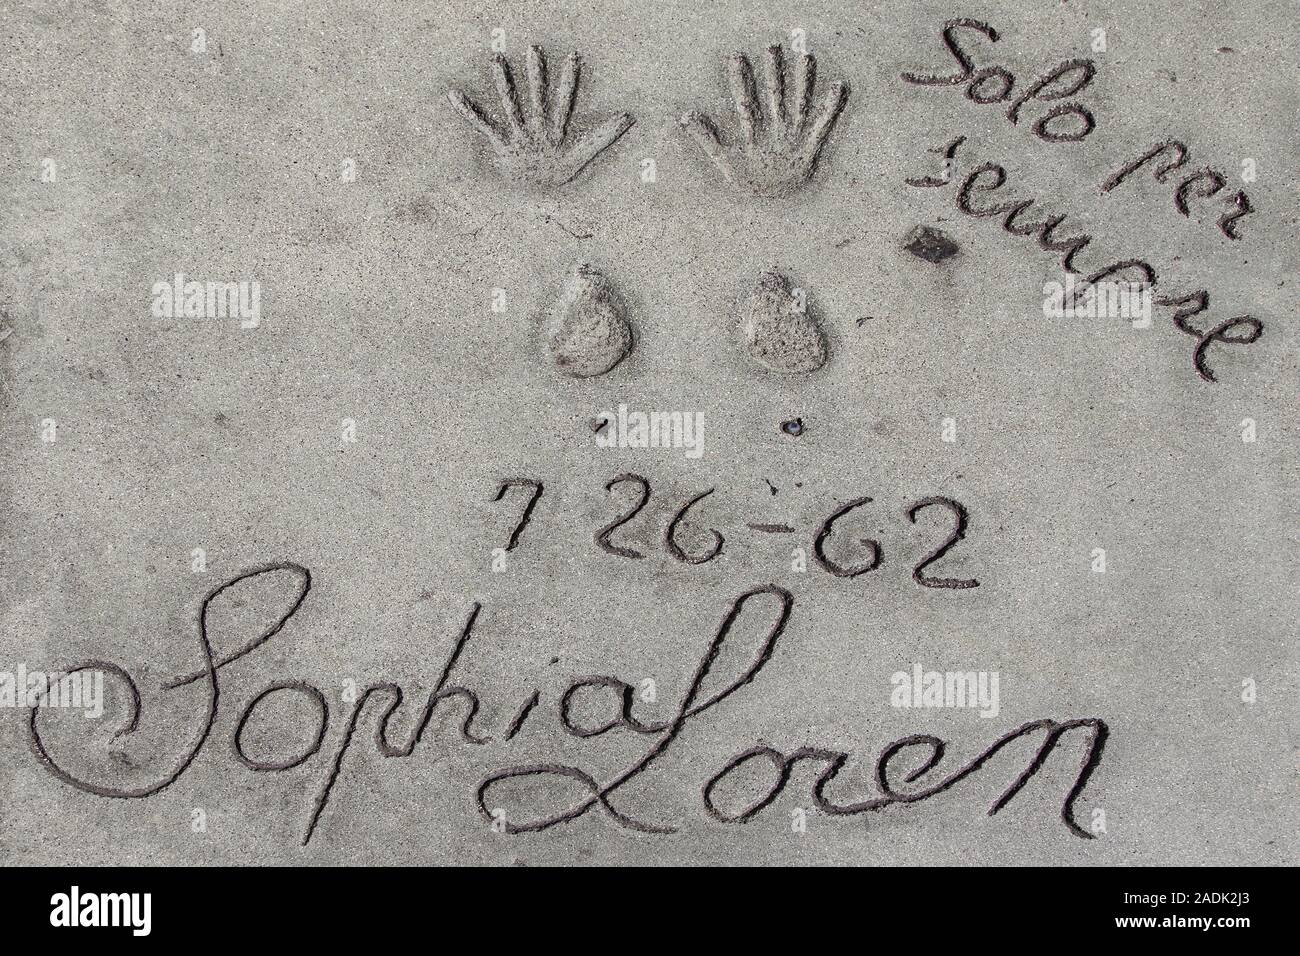 Los Angeles, California - September 07, 2019: Hand and footprints of actress Sophia Loren in the Grauman's Chinese Theatre forecourt, Hollywood. Stock Photo